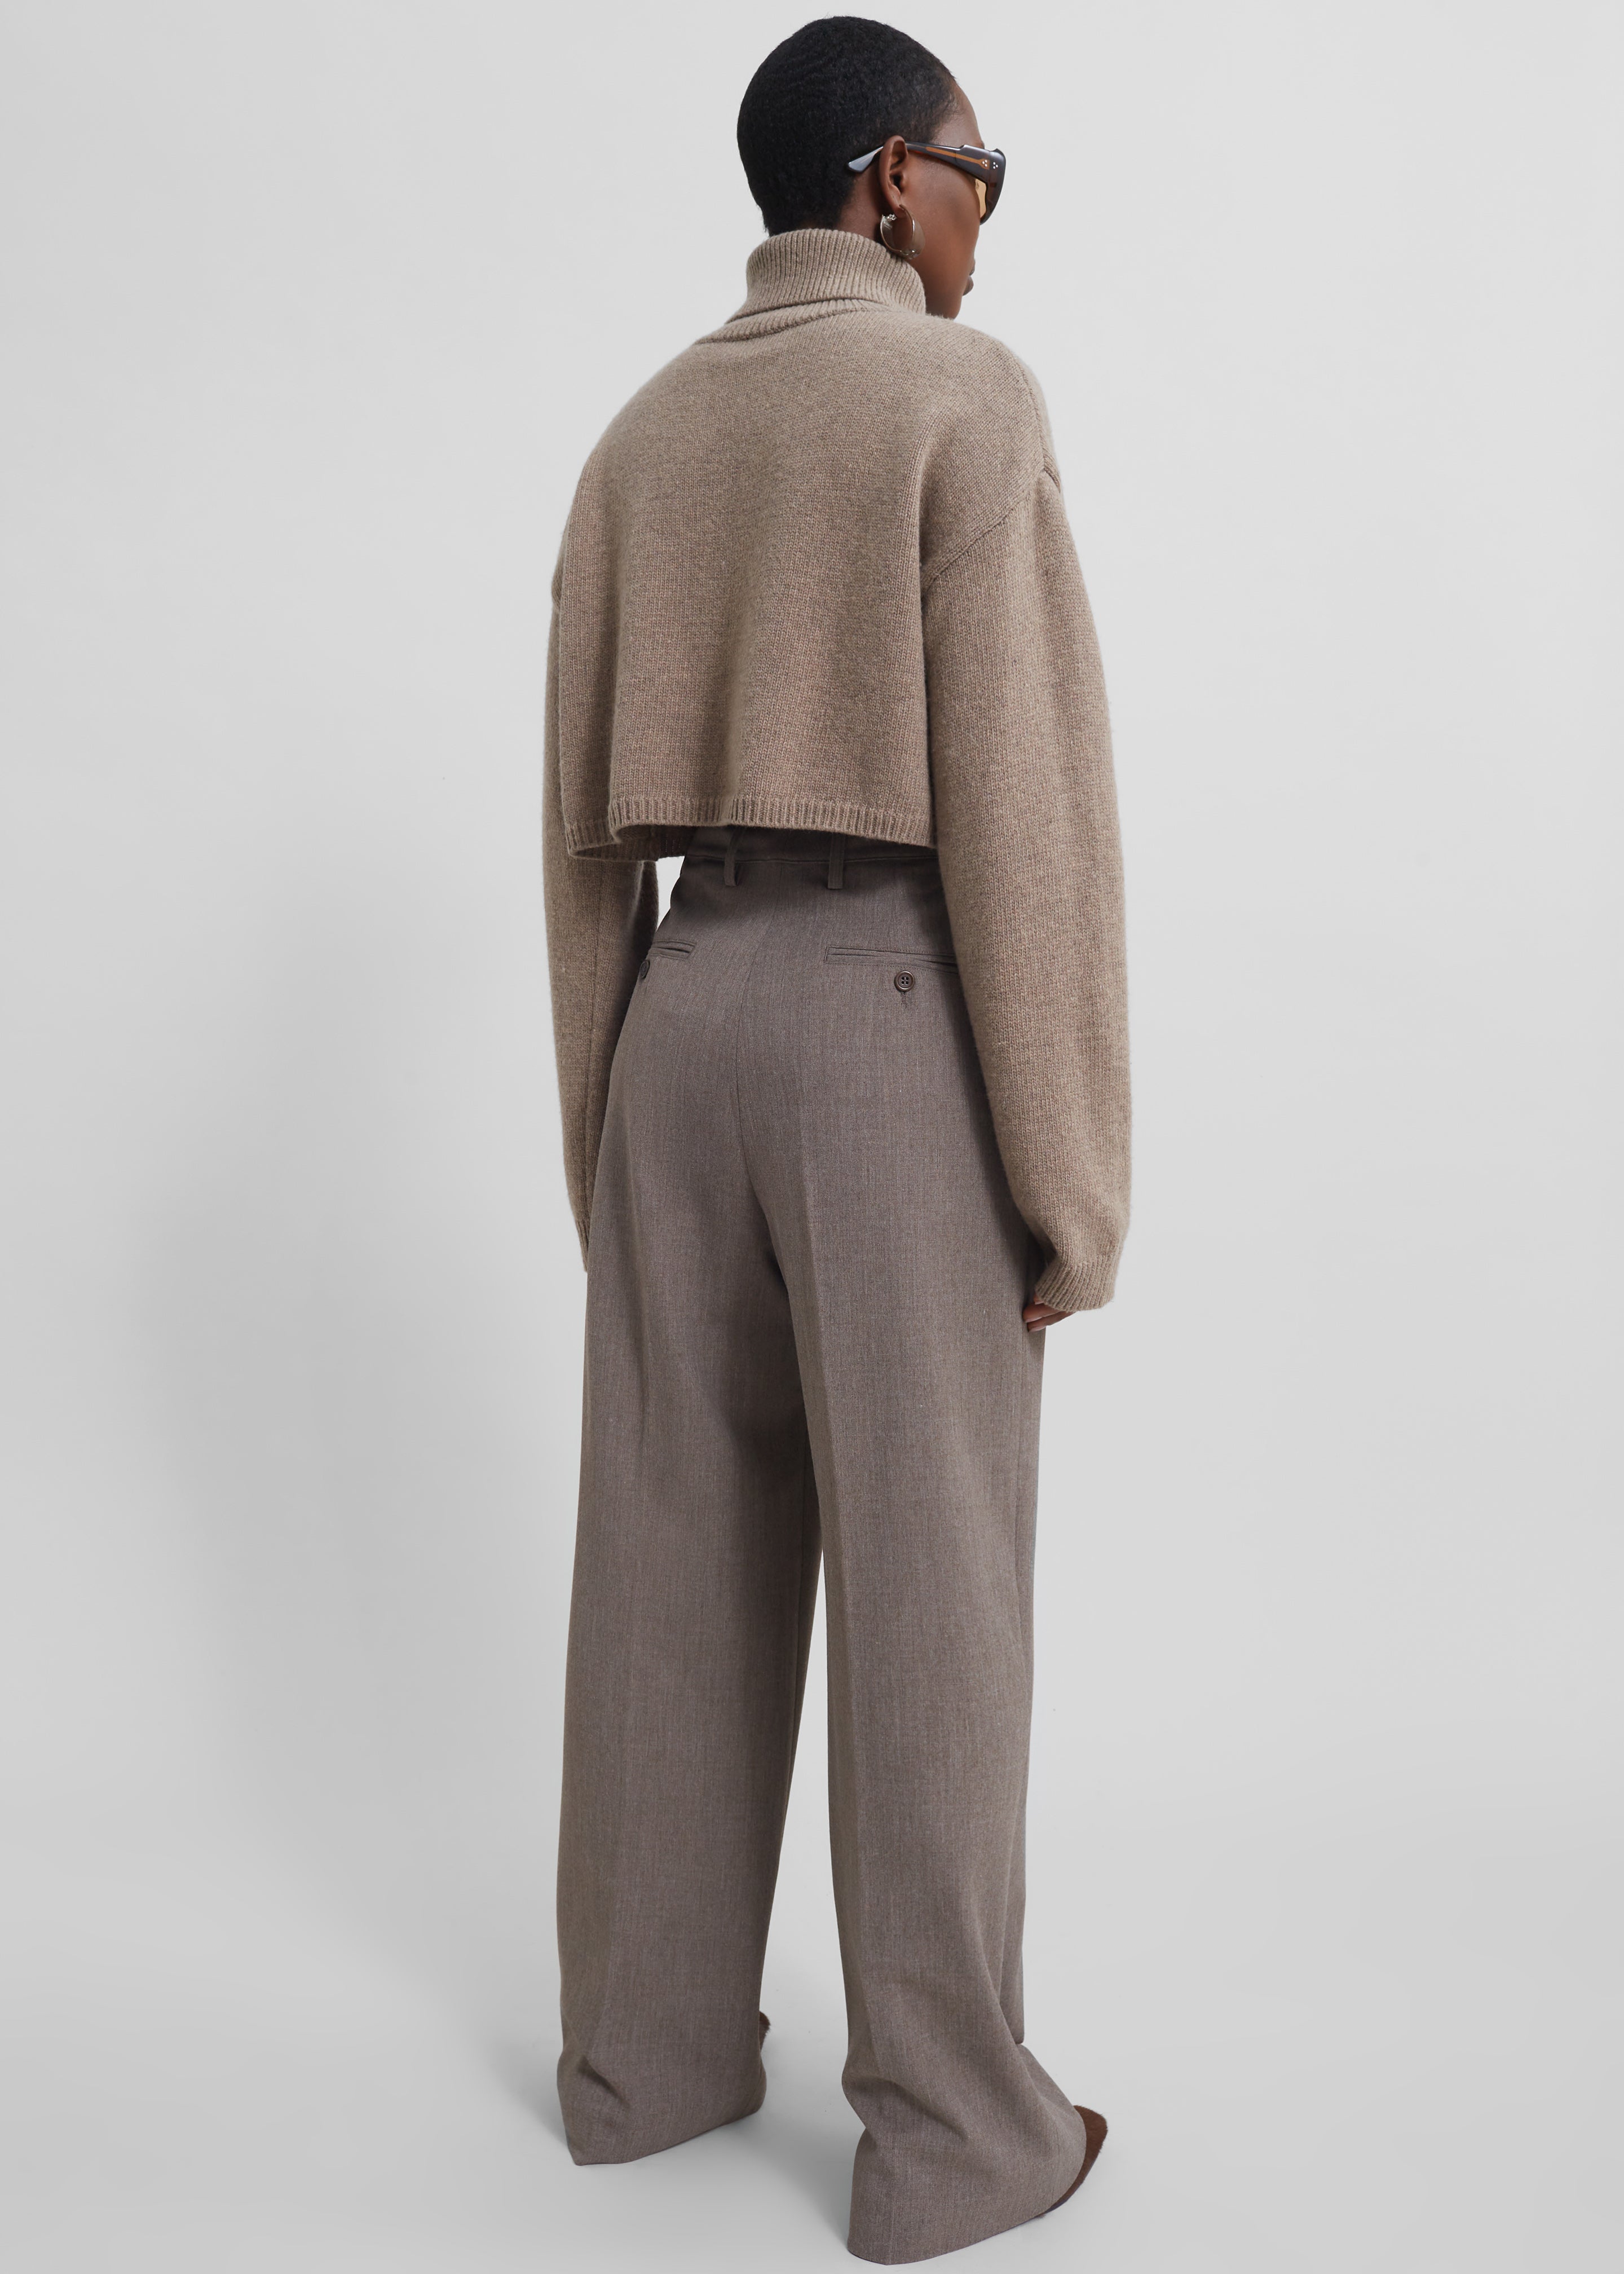 Beaufille Celeste Trousers - Heather Brown - 7